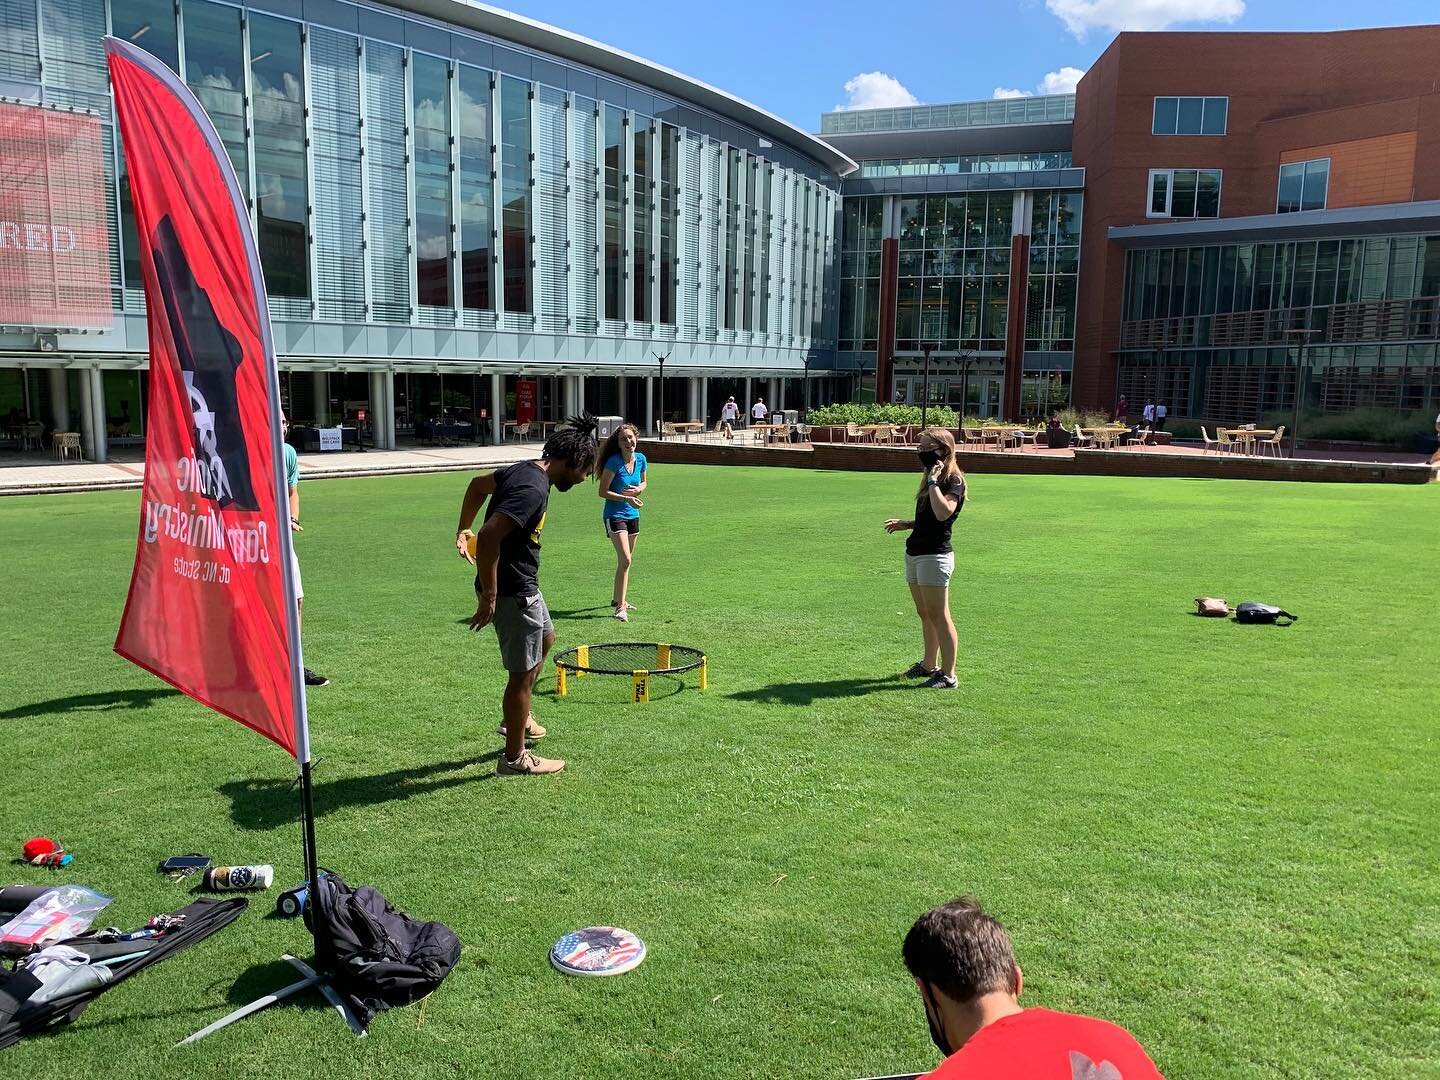 Today&rsquo;s outdoor games were a success. Shoutout to our members for their awesome social distancing skills! 
&bull;
&bull; 
Looking for ways to join our community? Checkout our calendar for more Welcome Week events.